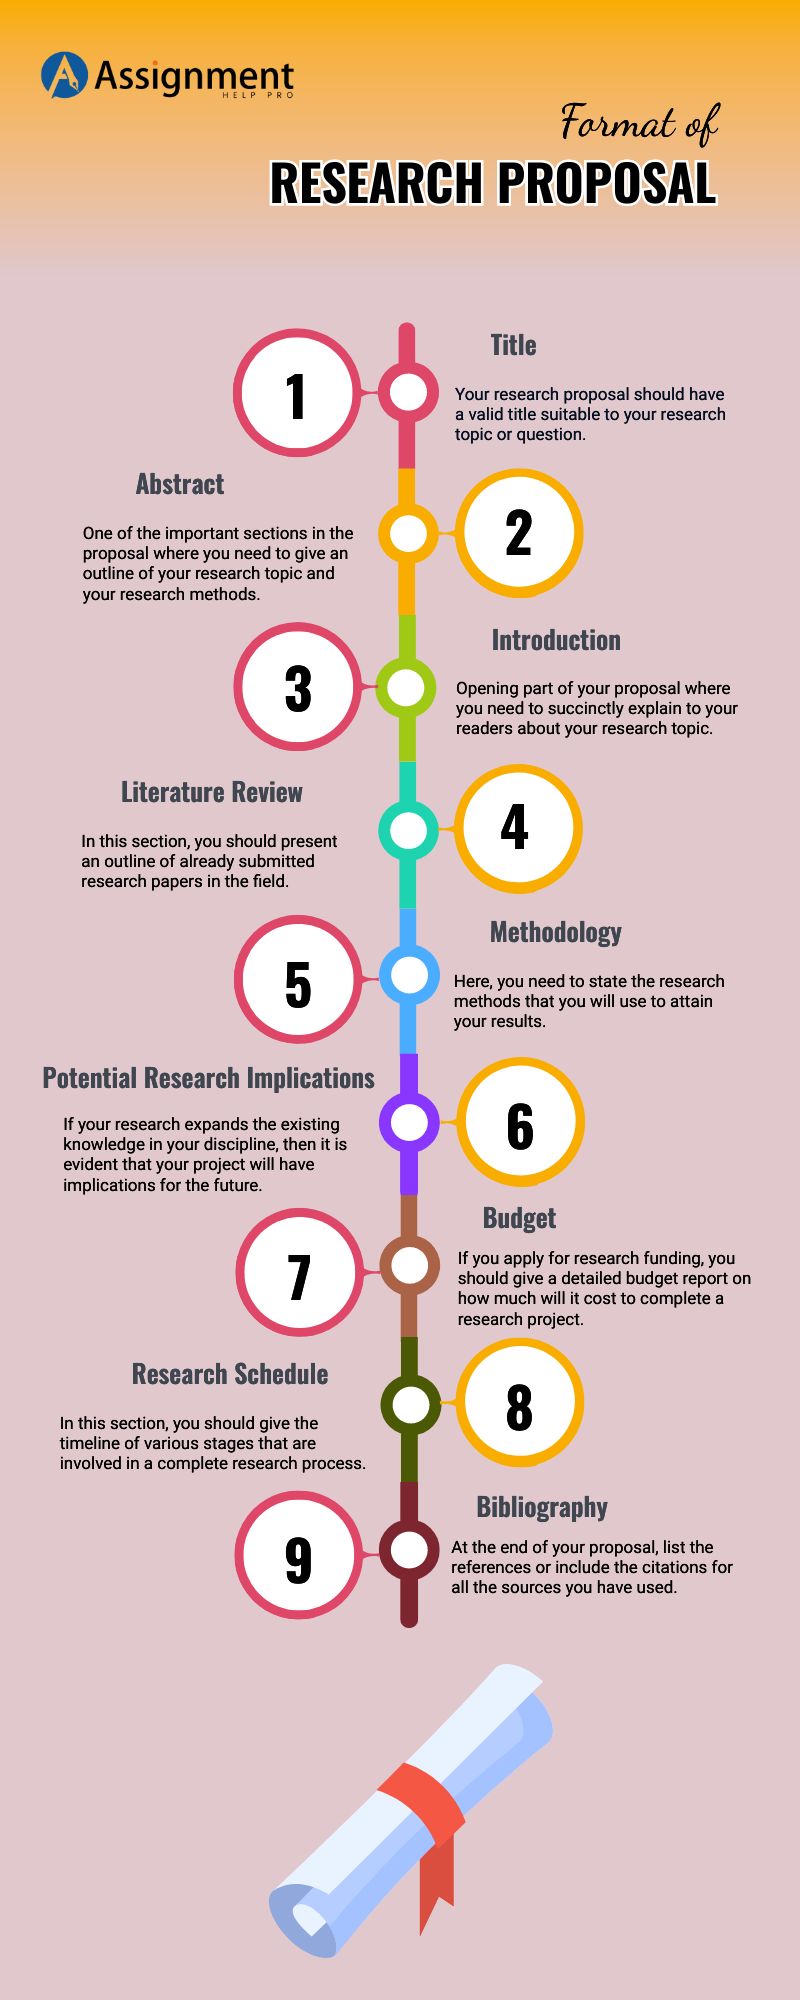 elements of a research proposal in scientific research